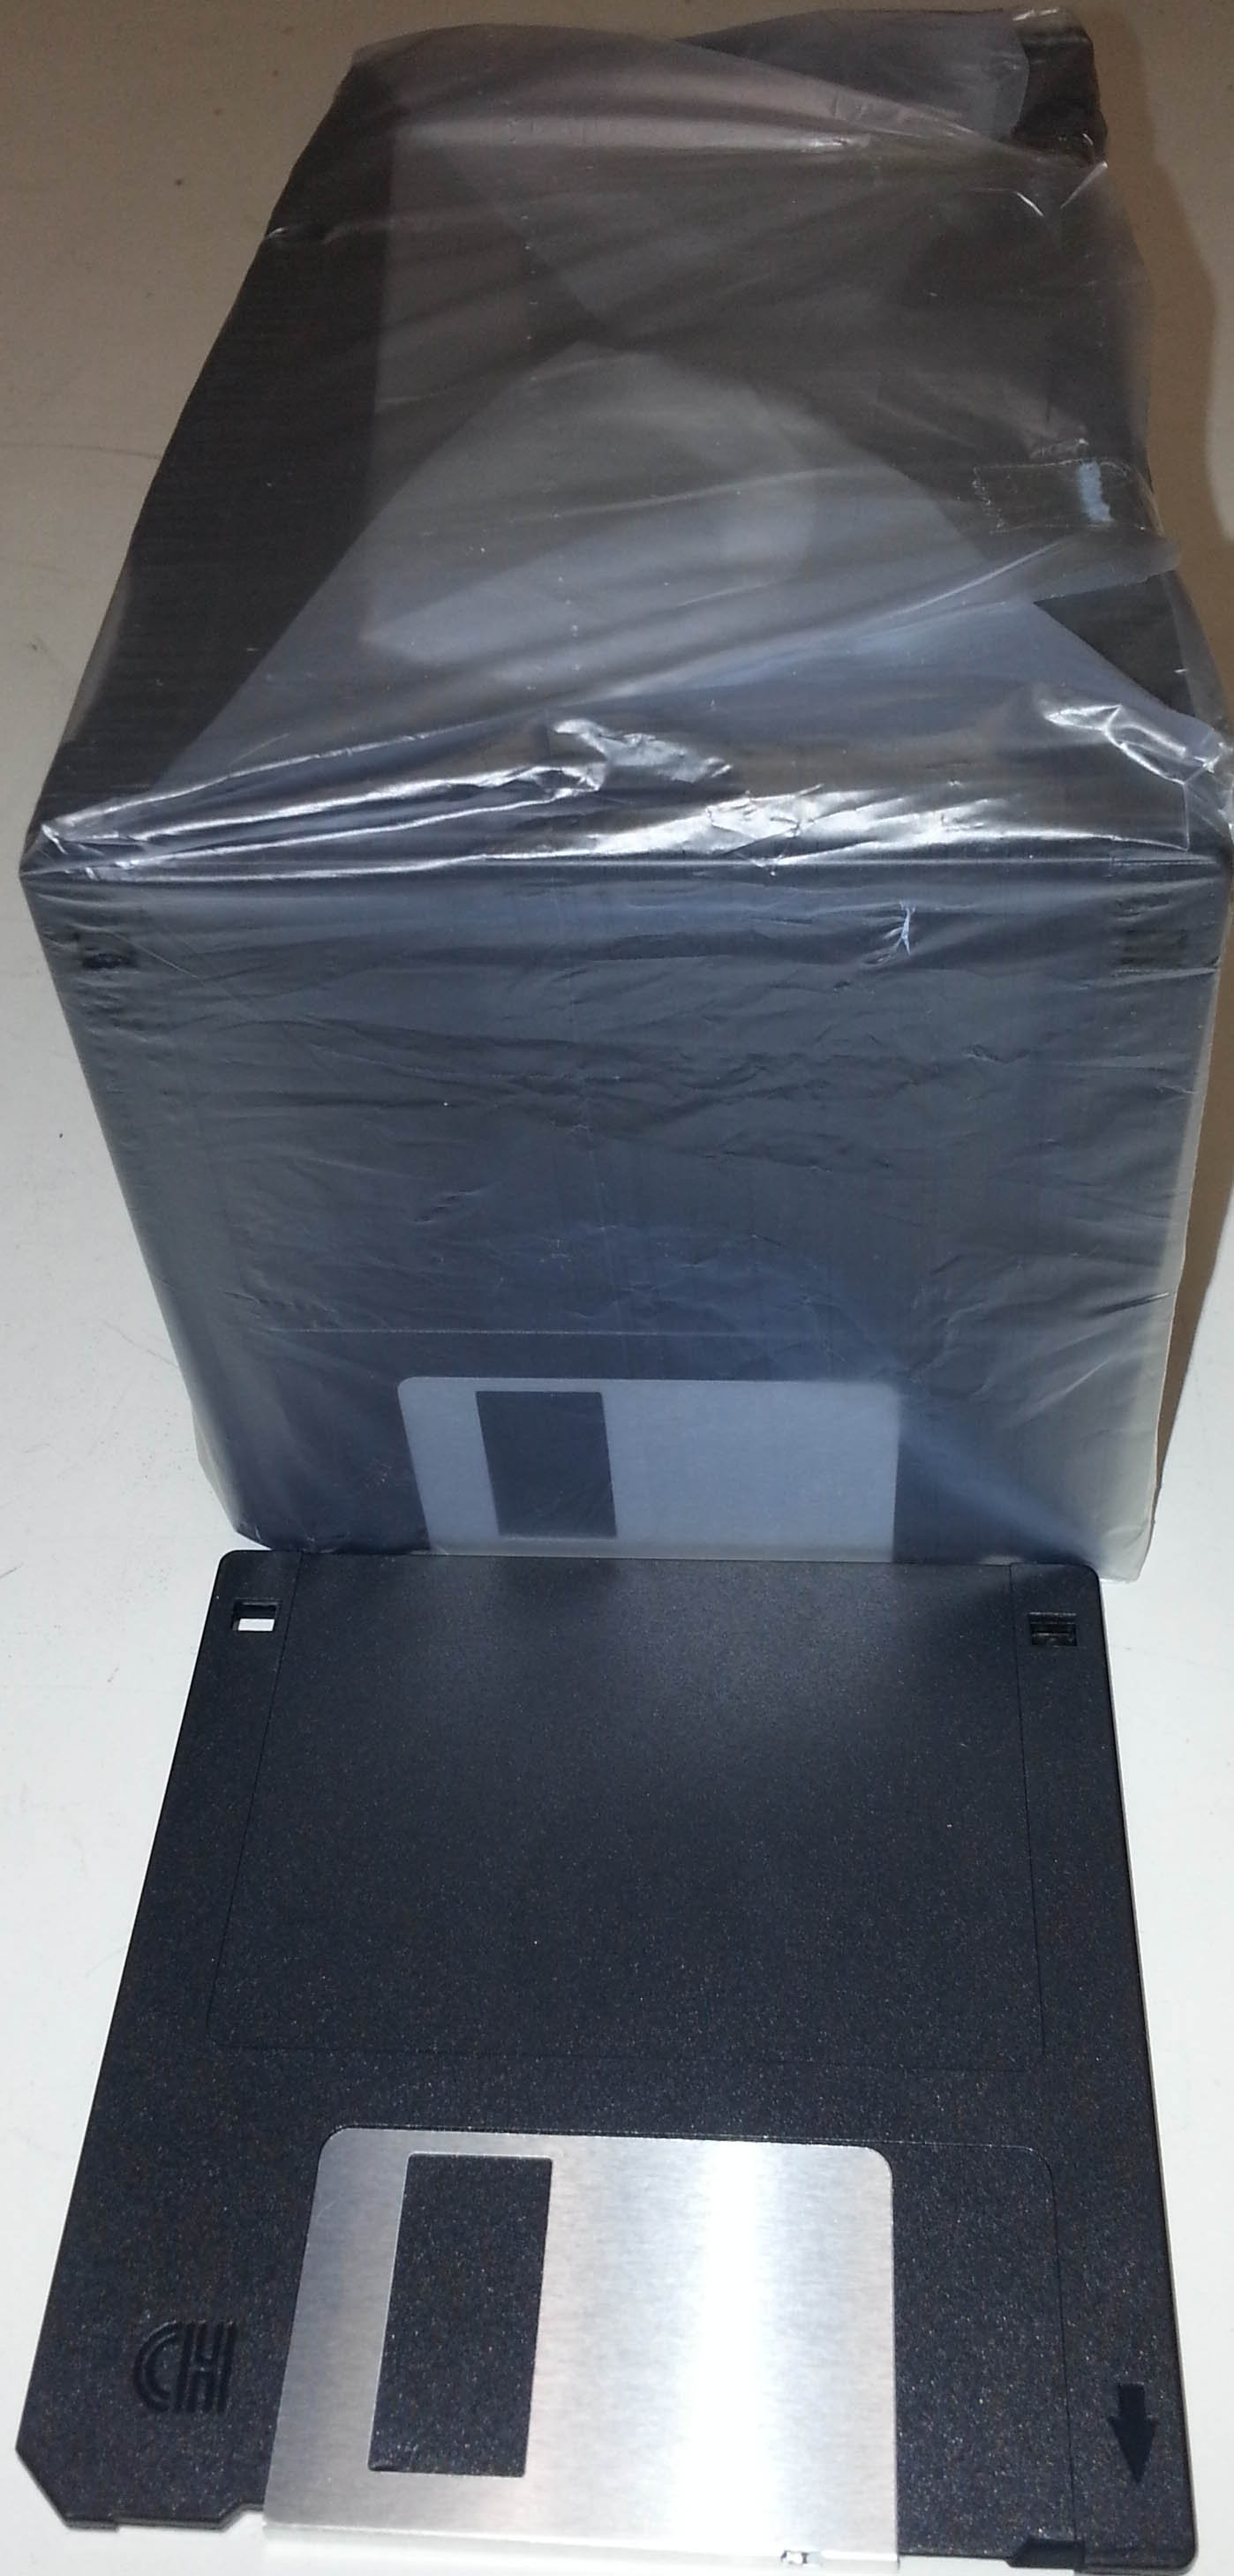 3.5 inch Diskettes Formatted @ 720K **TABLESS** 30 Double Density DS/DD MF2-DD Floppy Disks